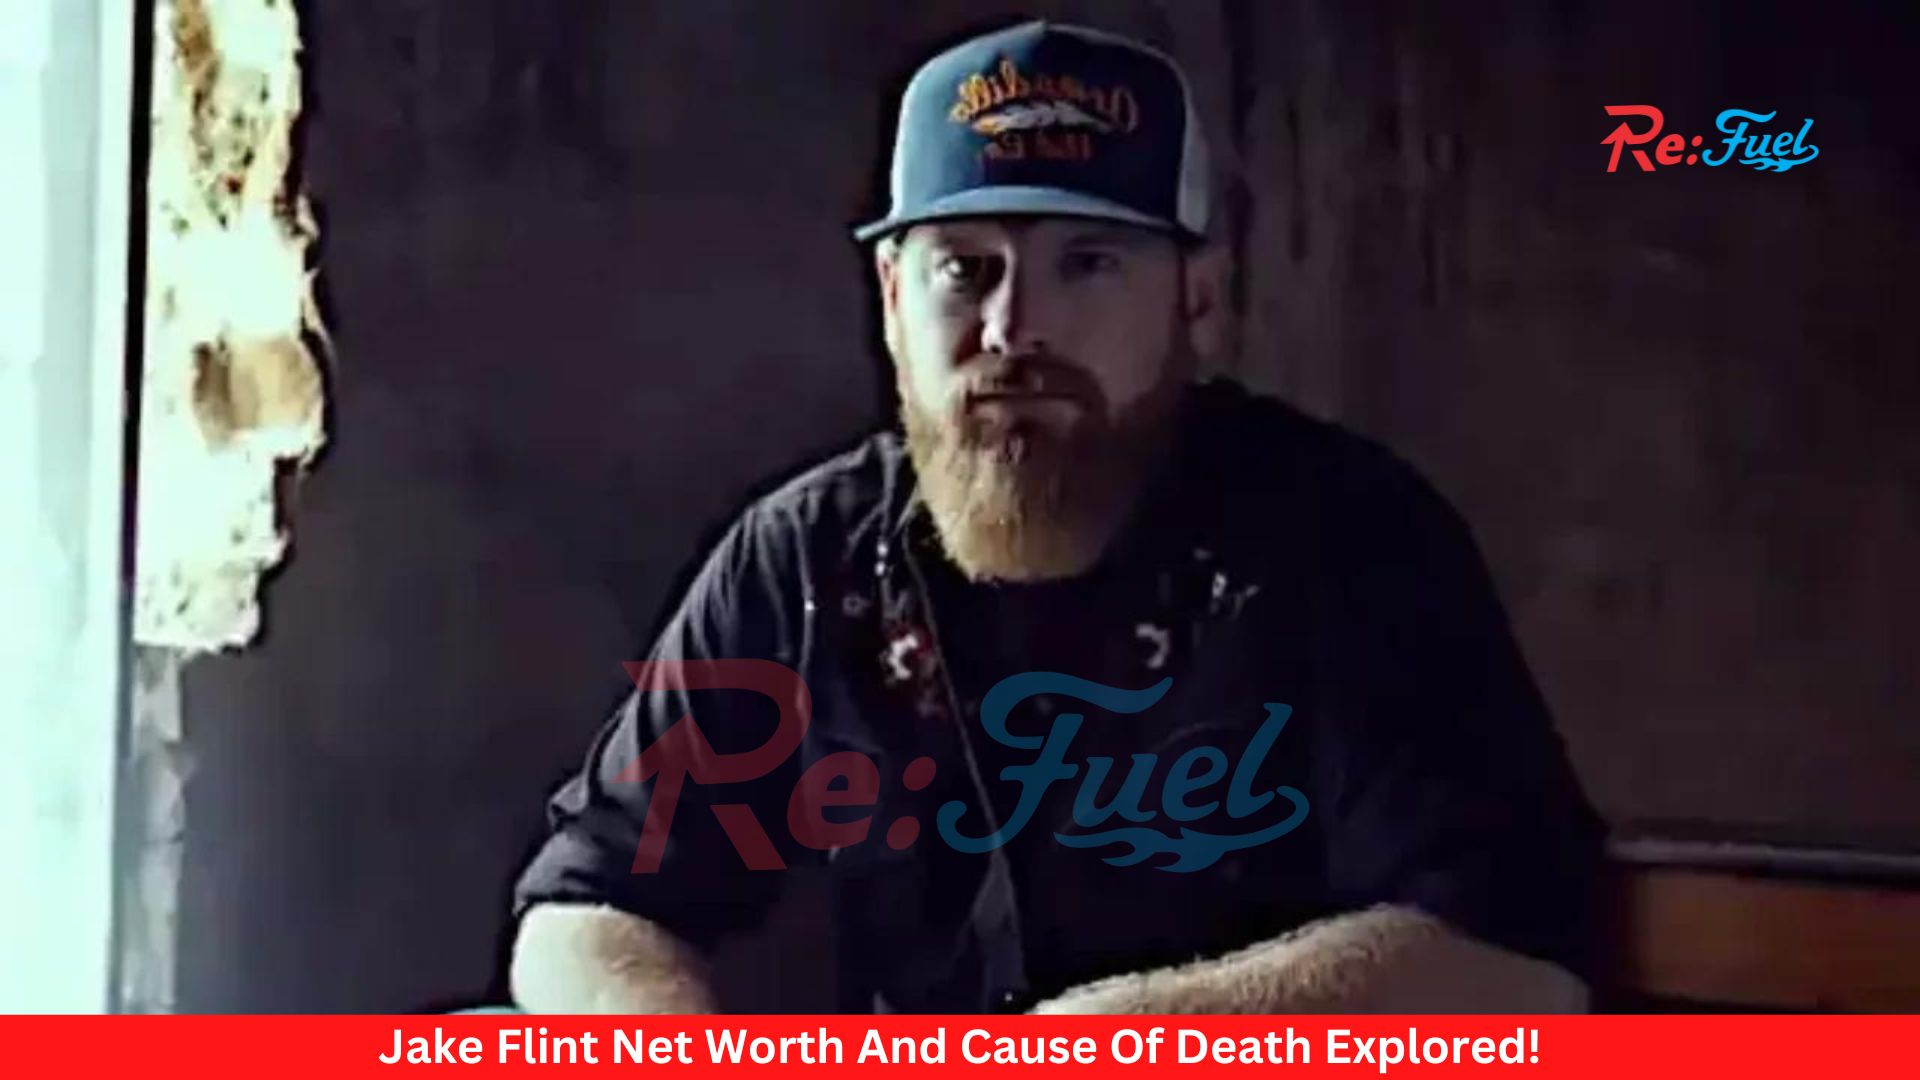 Jake Flint Net Worth And Cause Of Death Explored!